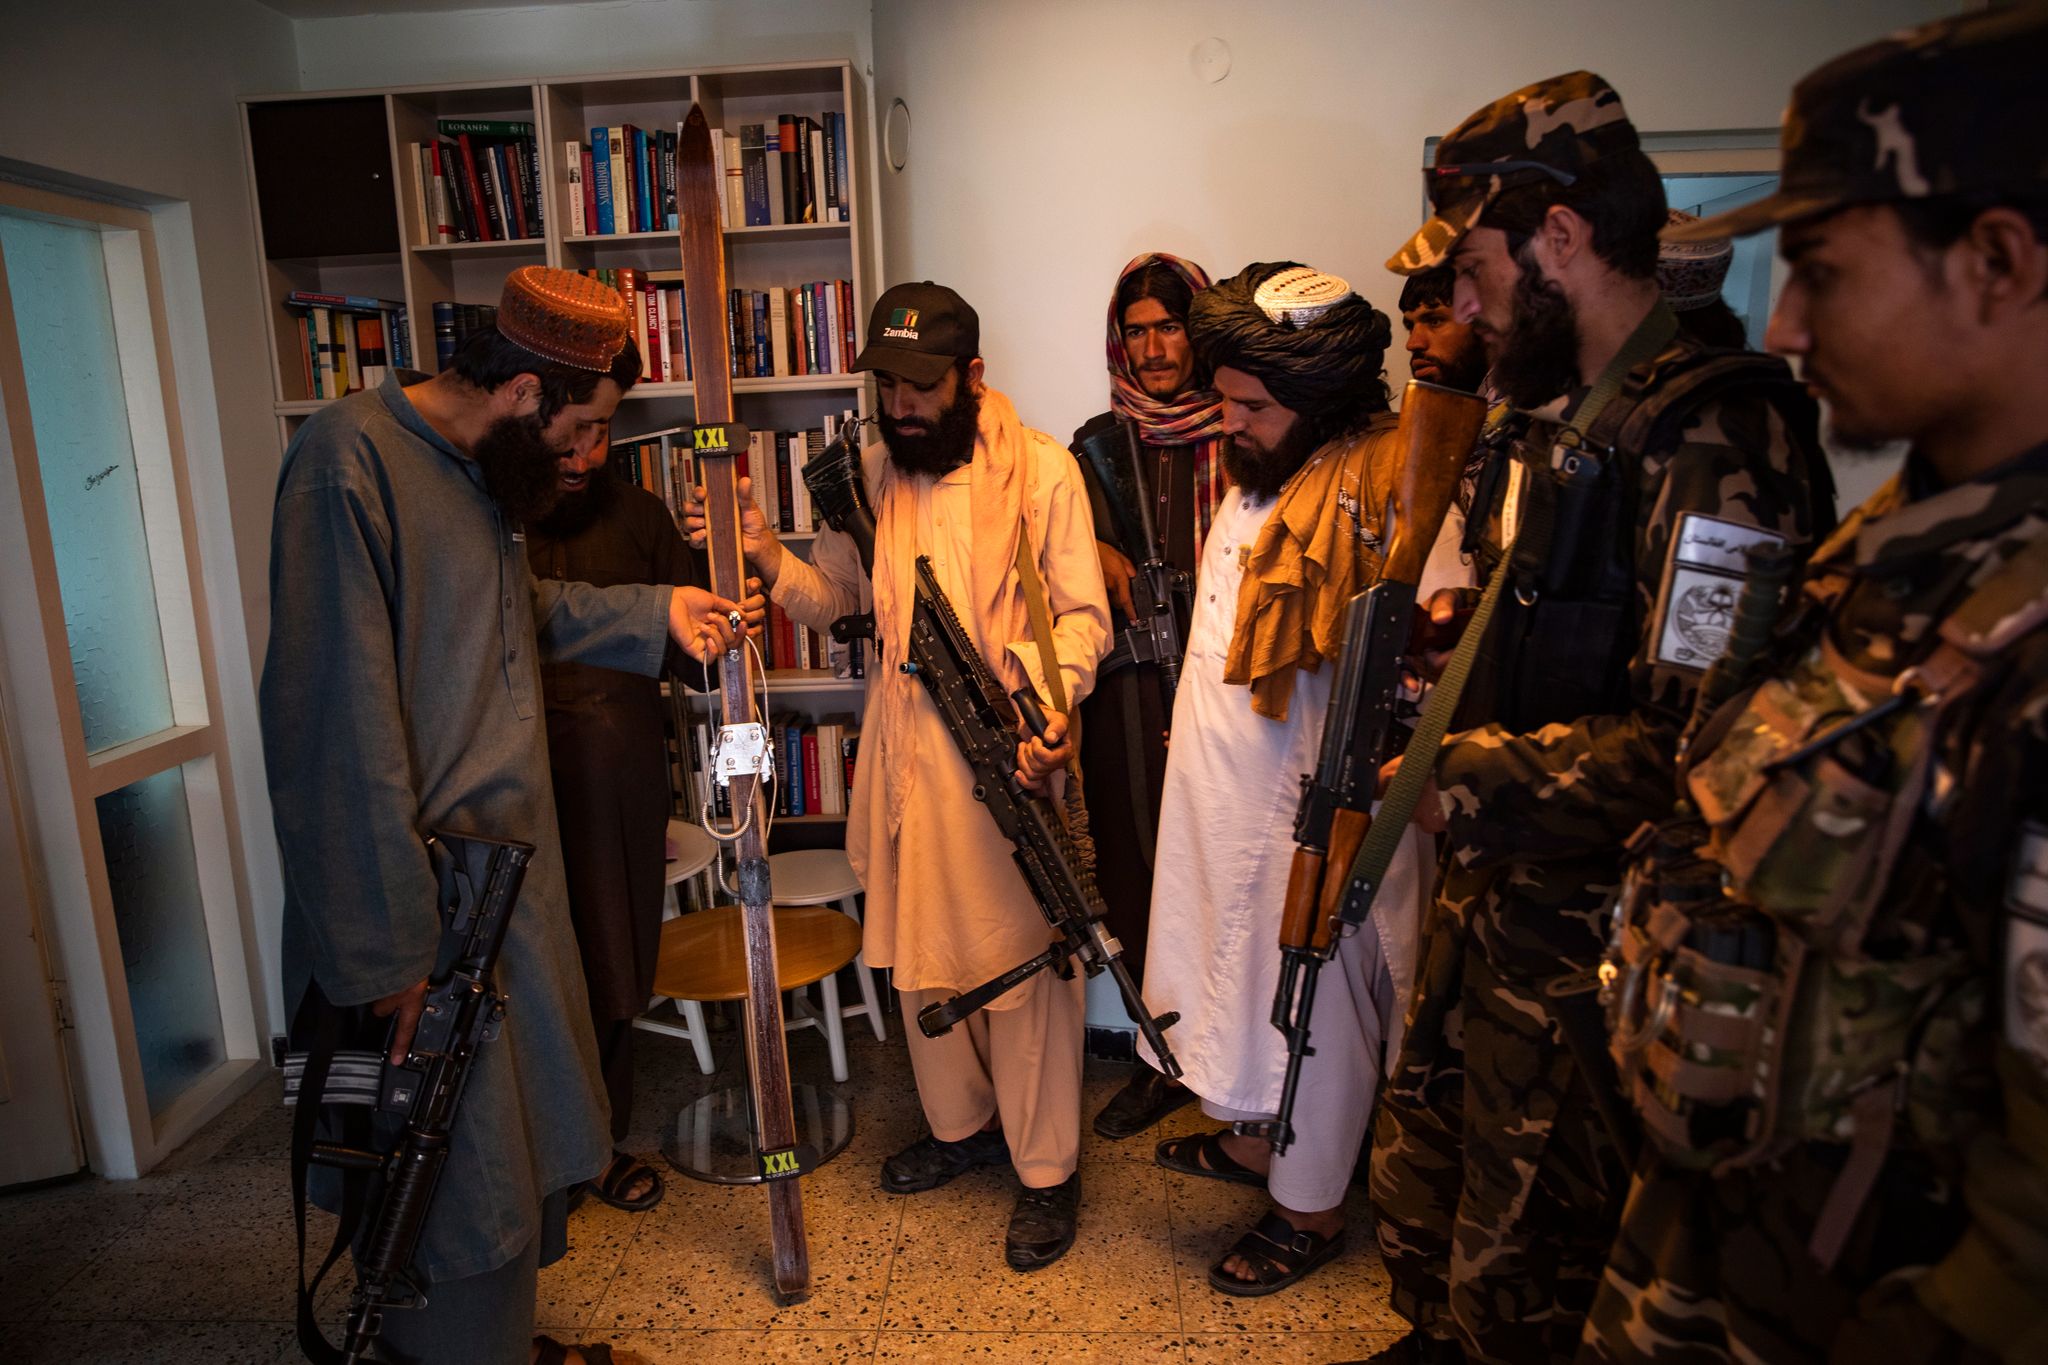 The Taliban, A Pair of Skis, and Seeing What We Think We Know